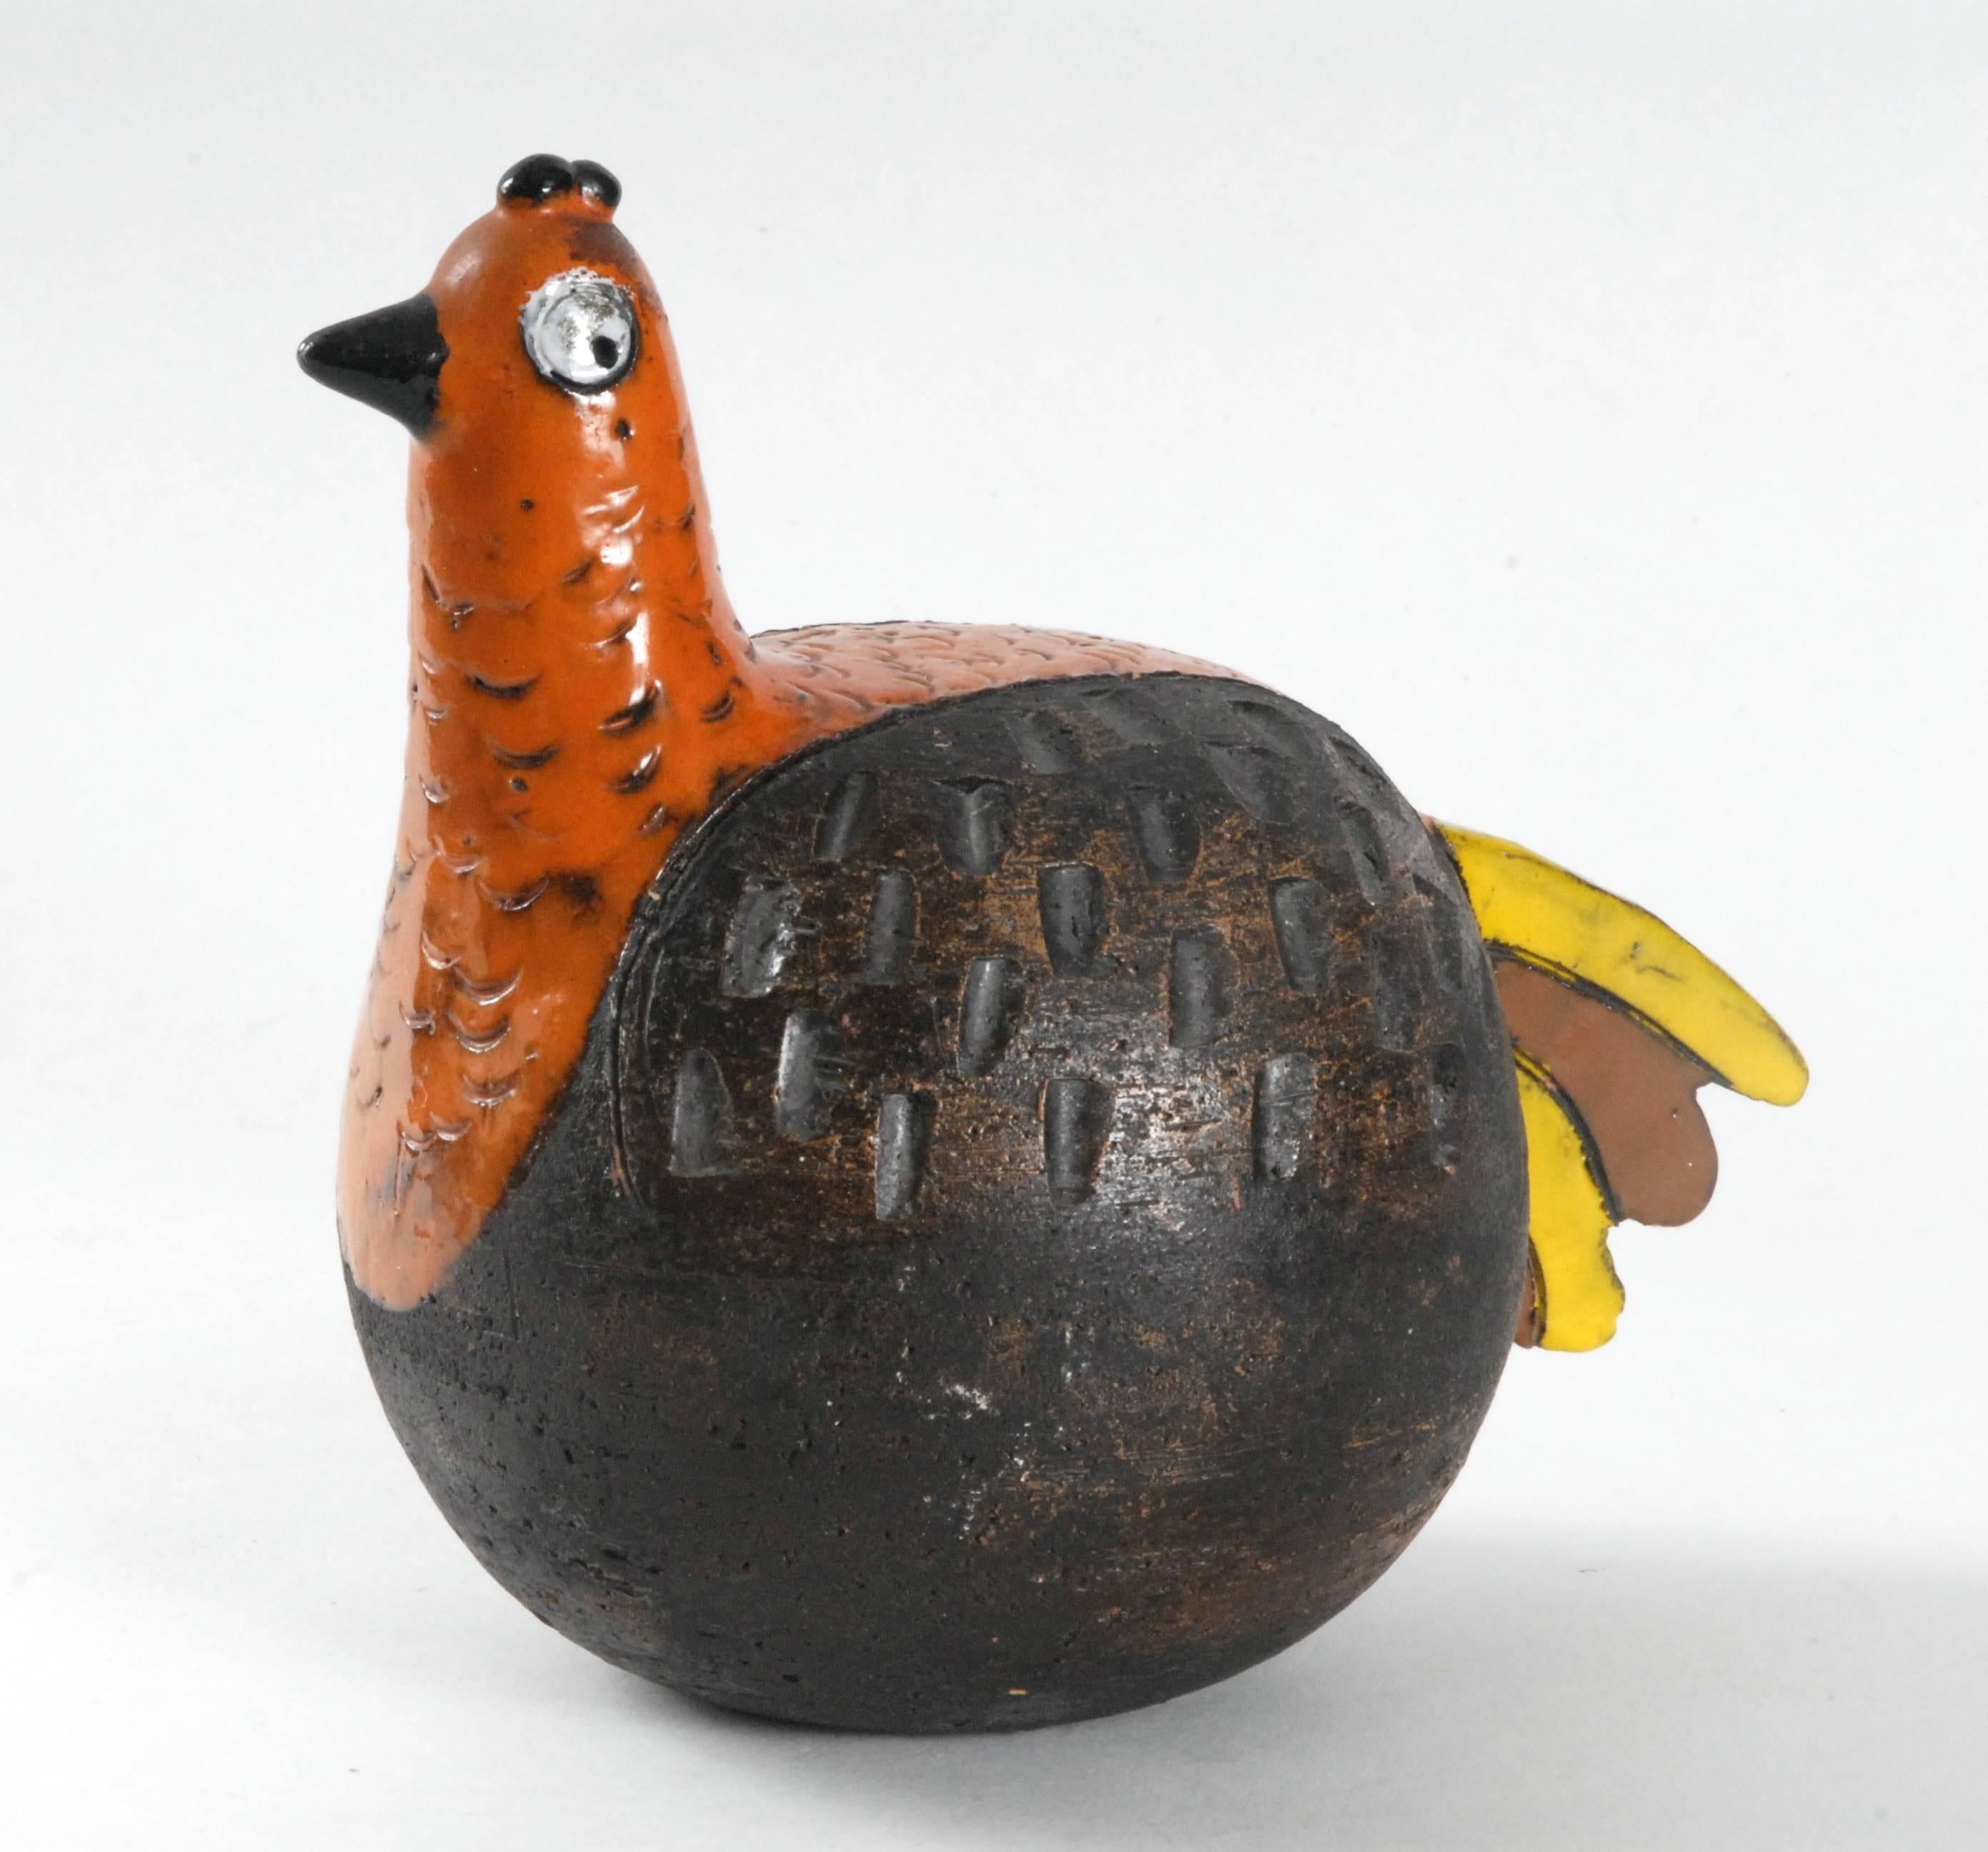 An Aldo Londi designed Gallina, [Hen] highly stylized and whimsical, this example in 
orange, manganese-brown and yellow glazes with impressed and sgraffito patterns. A rare and collectable piece.